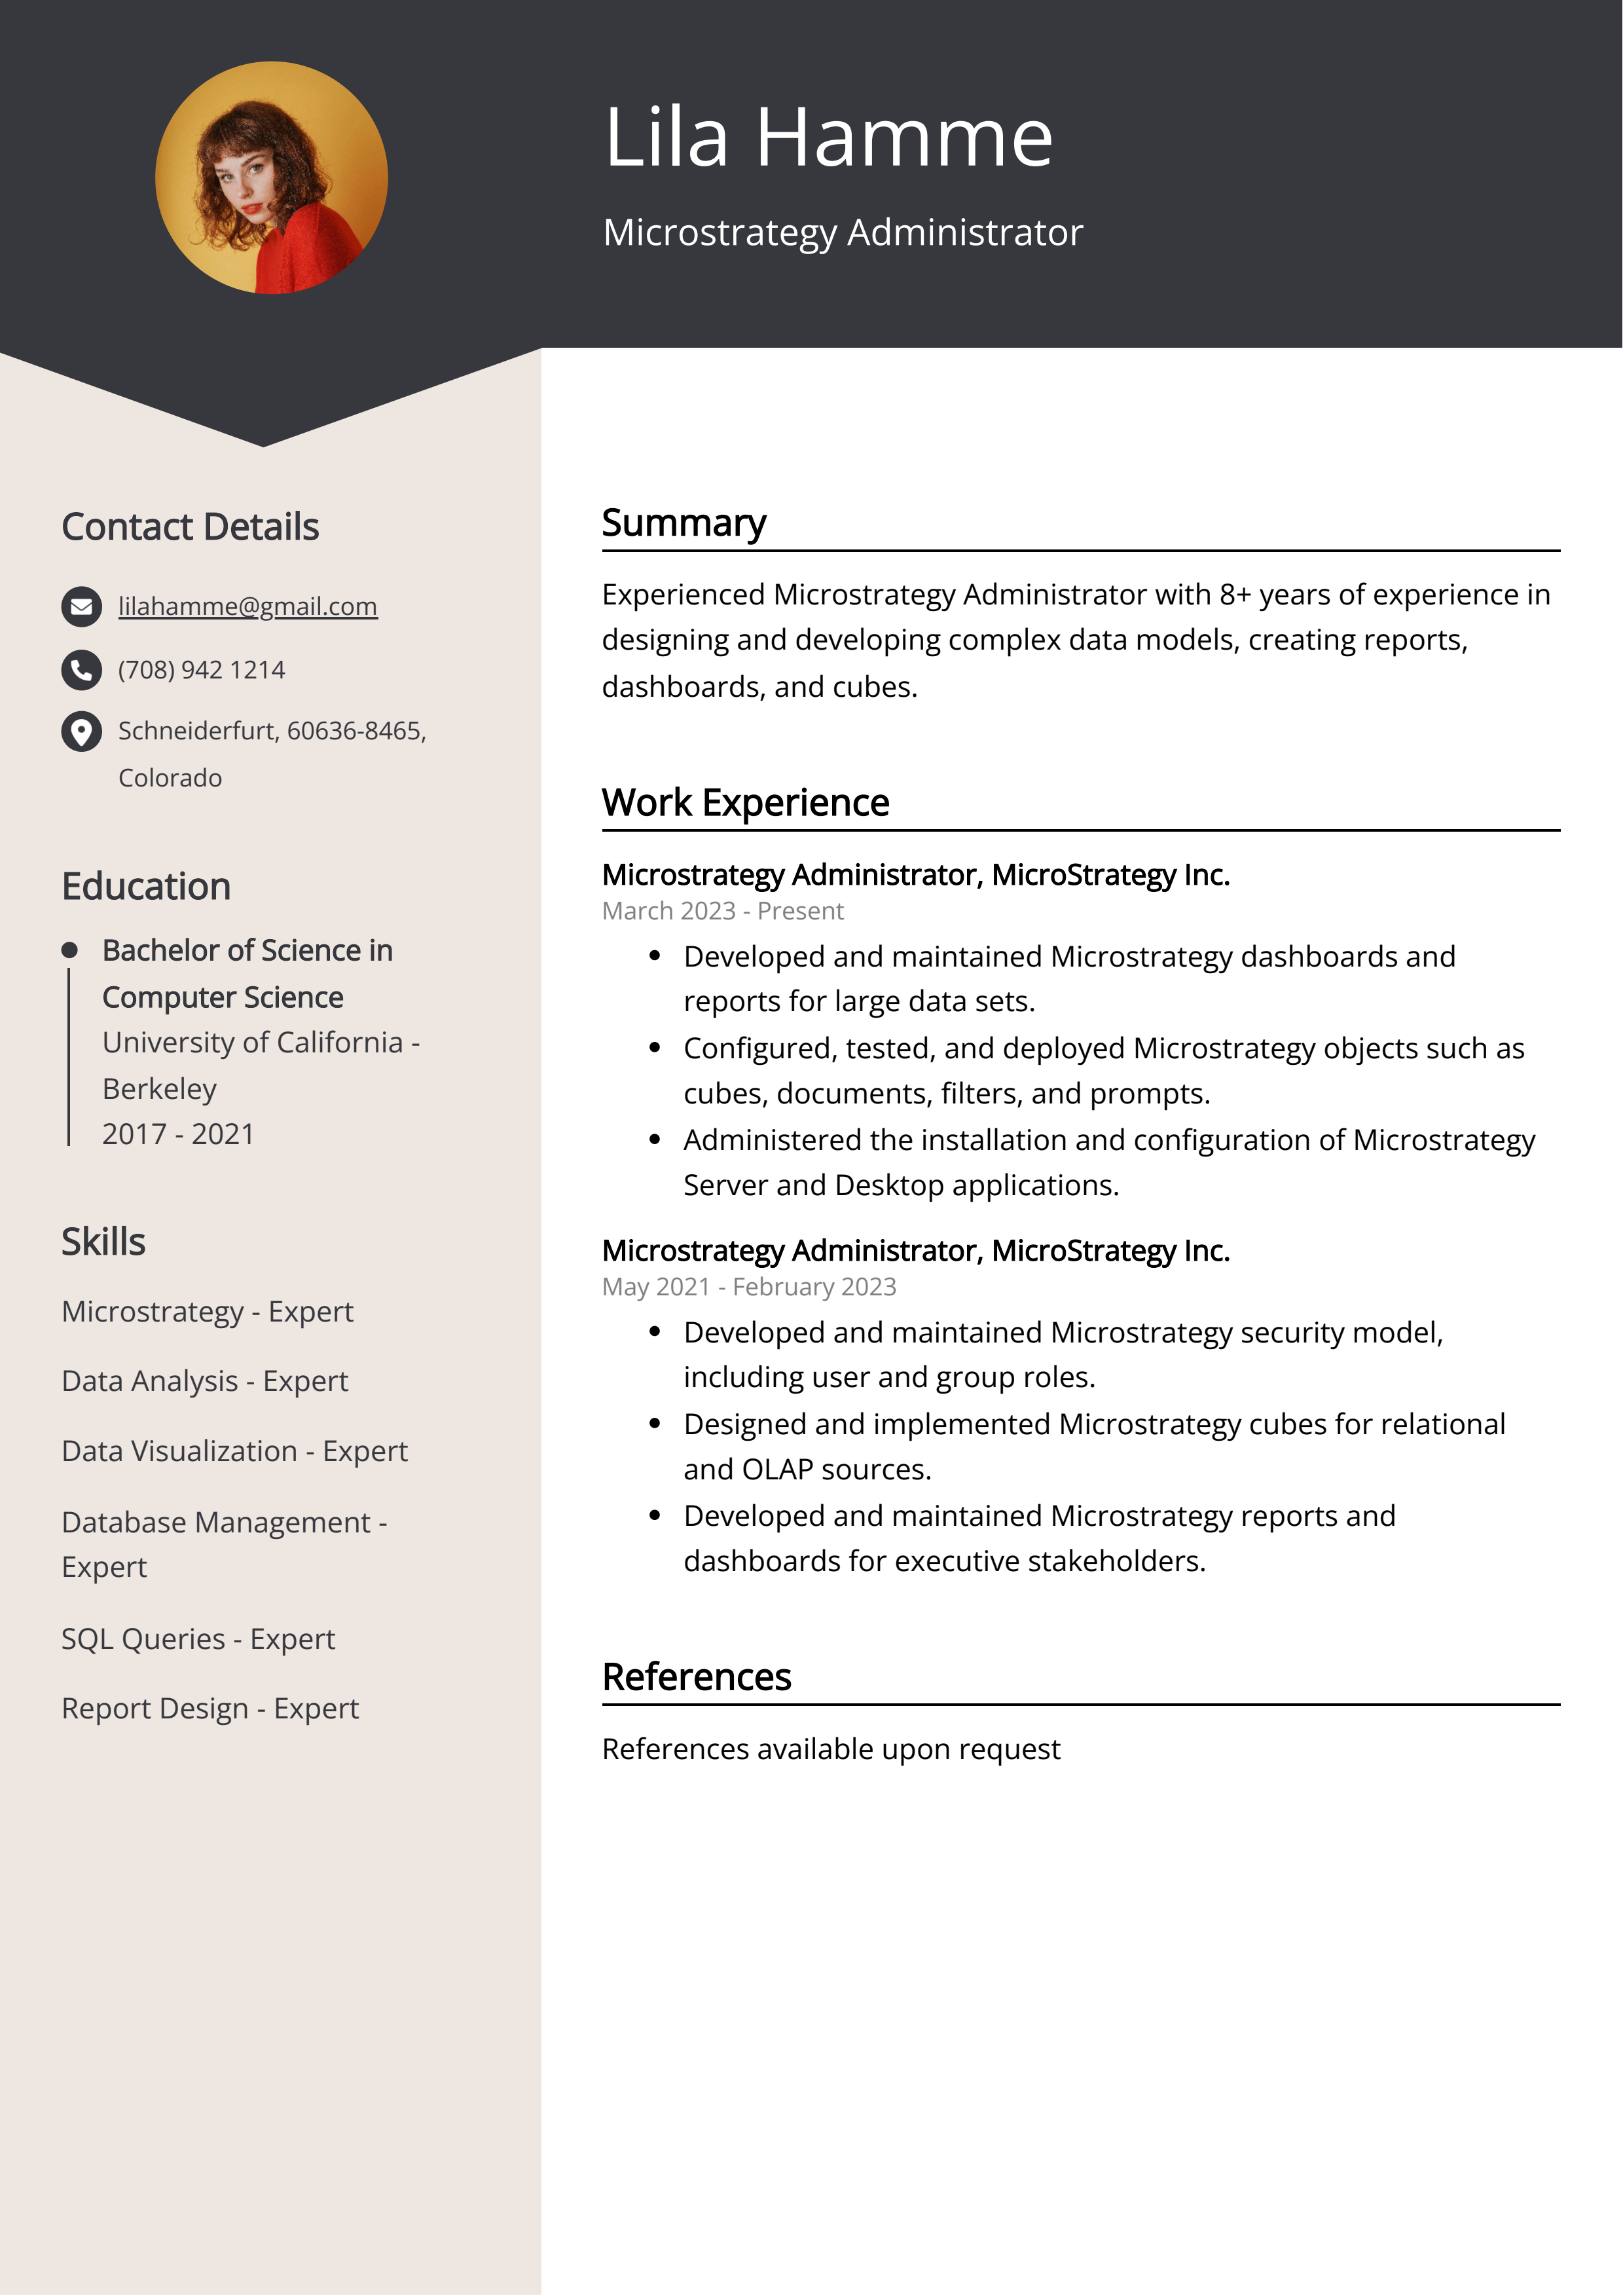 Microstrategy Administrator Resume Example